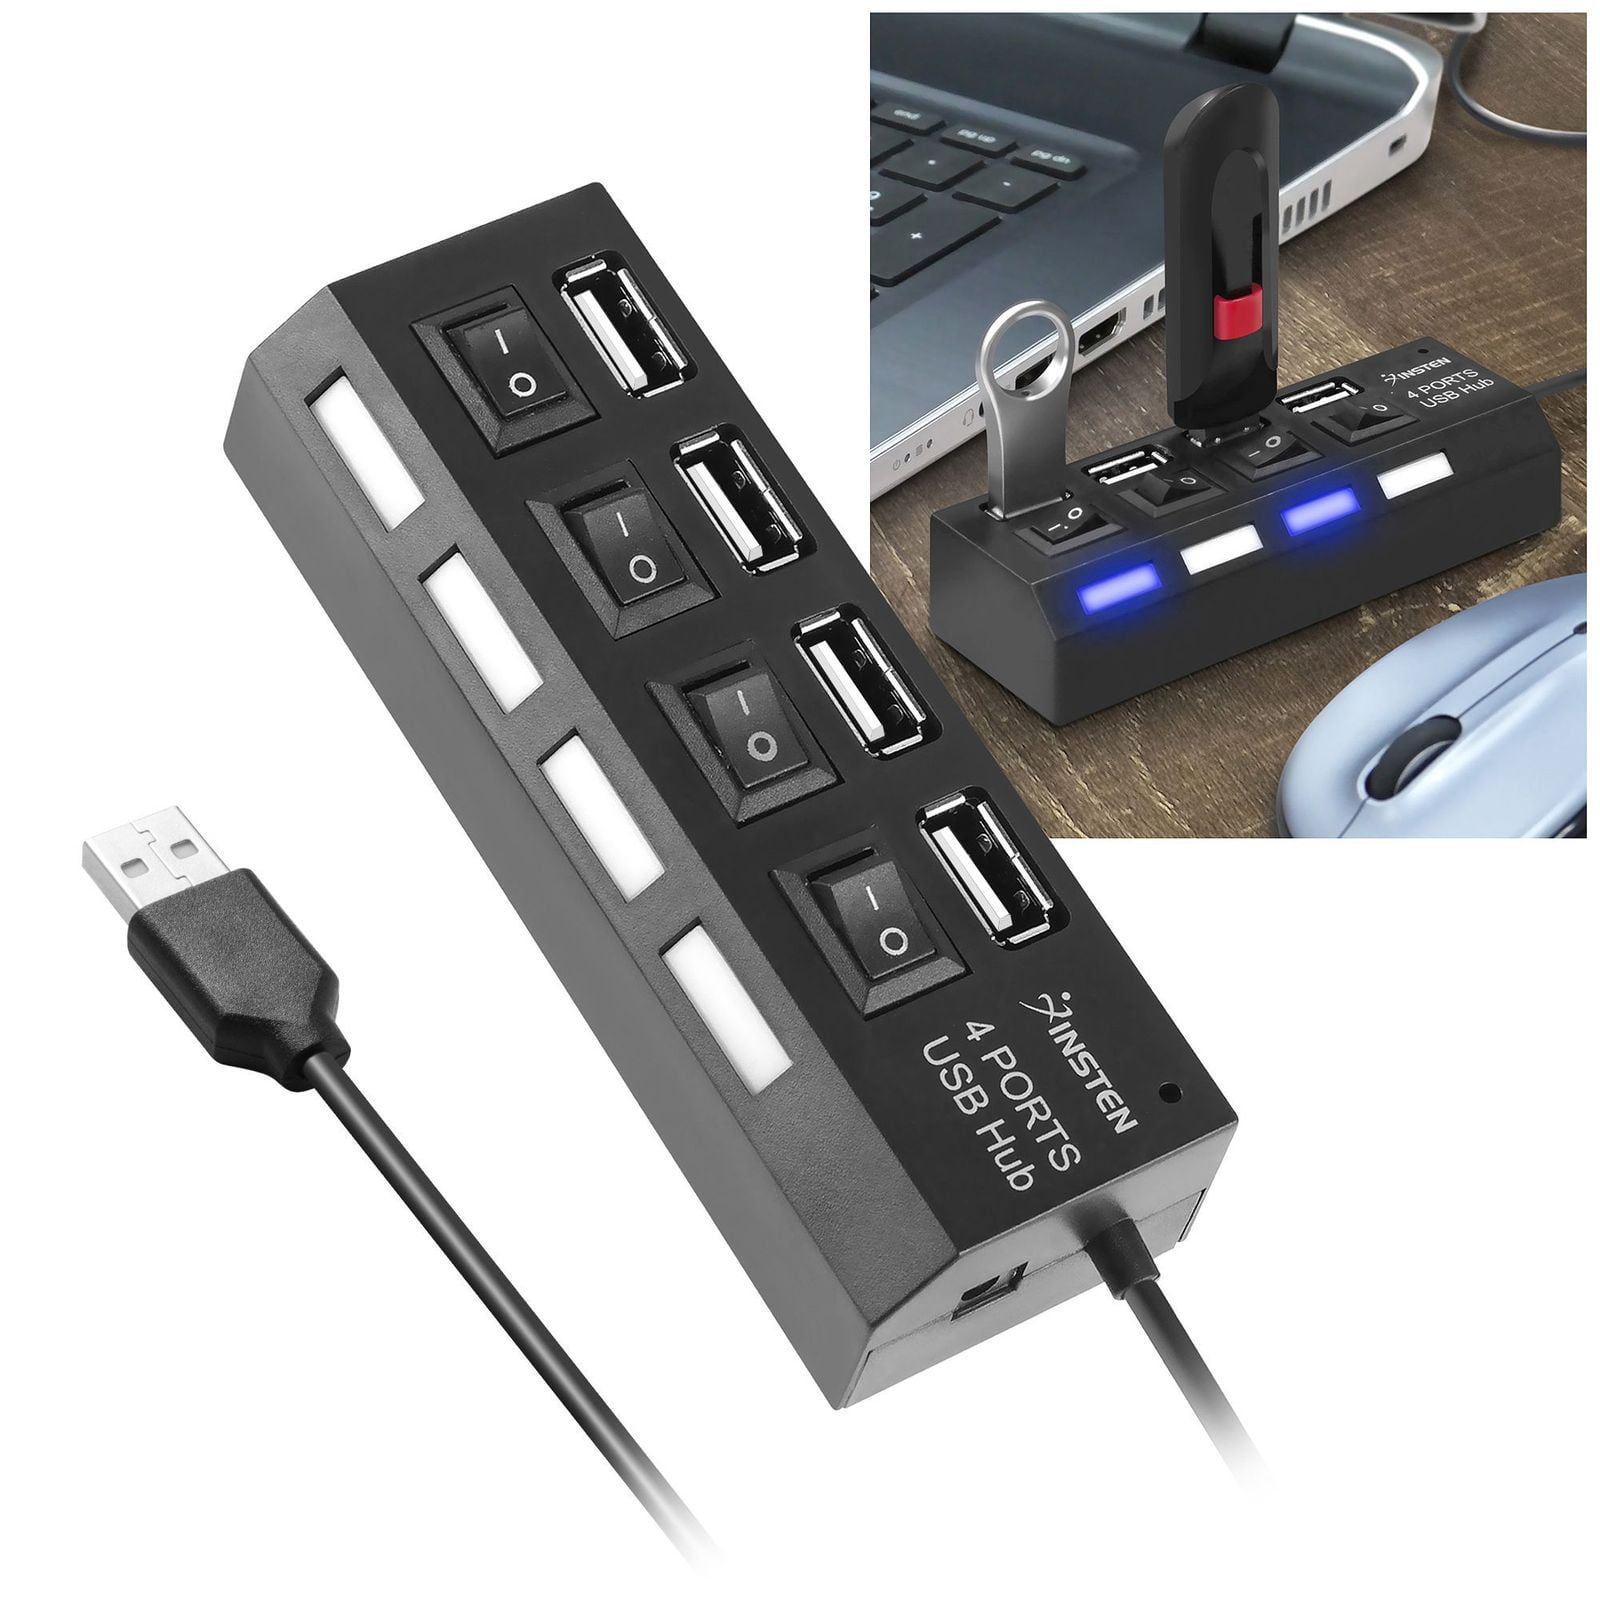 Ship from USA Directly 10 Port High Speed USB 2.0 Hub with Power Adapter and 2 Control Switches 